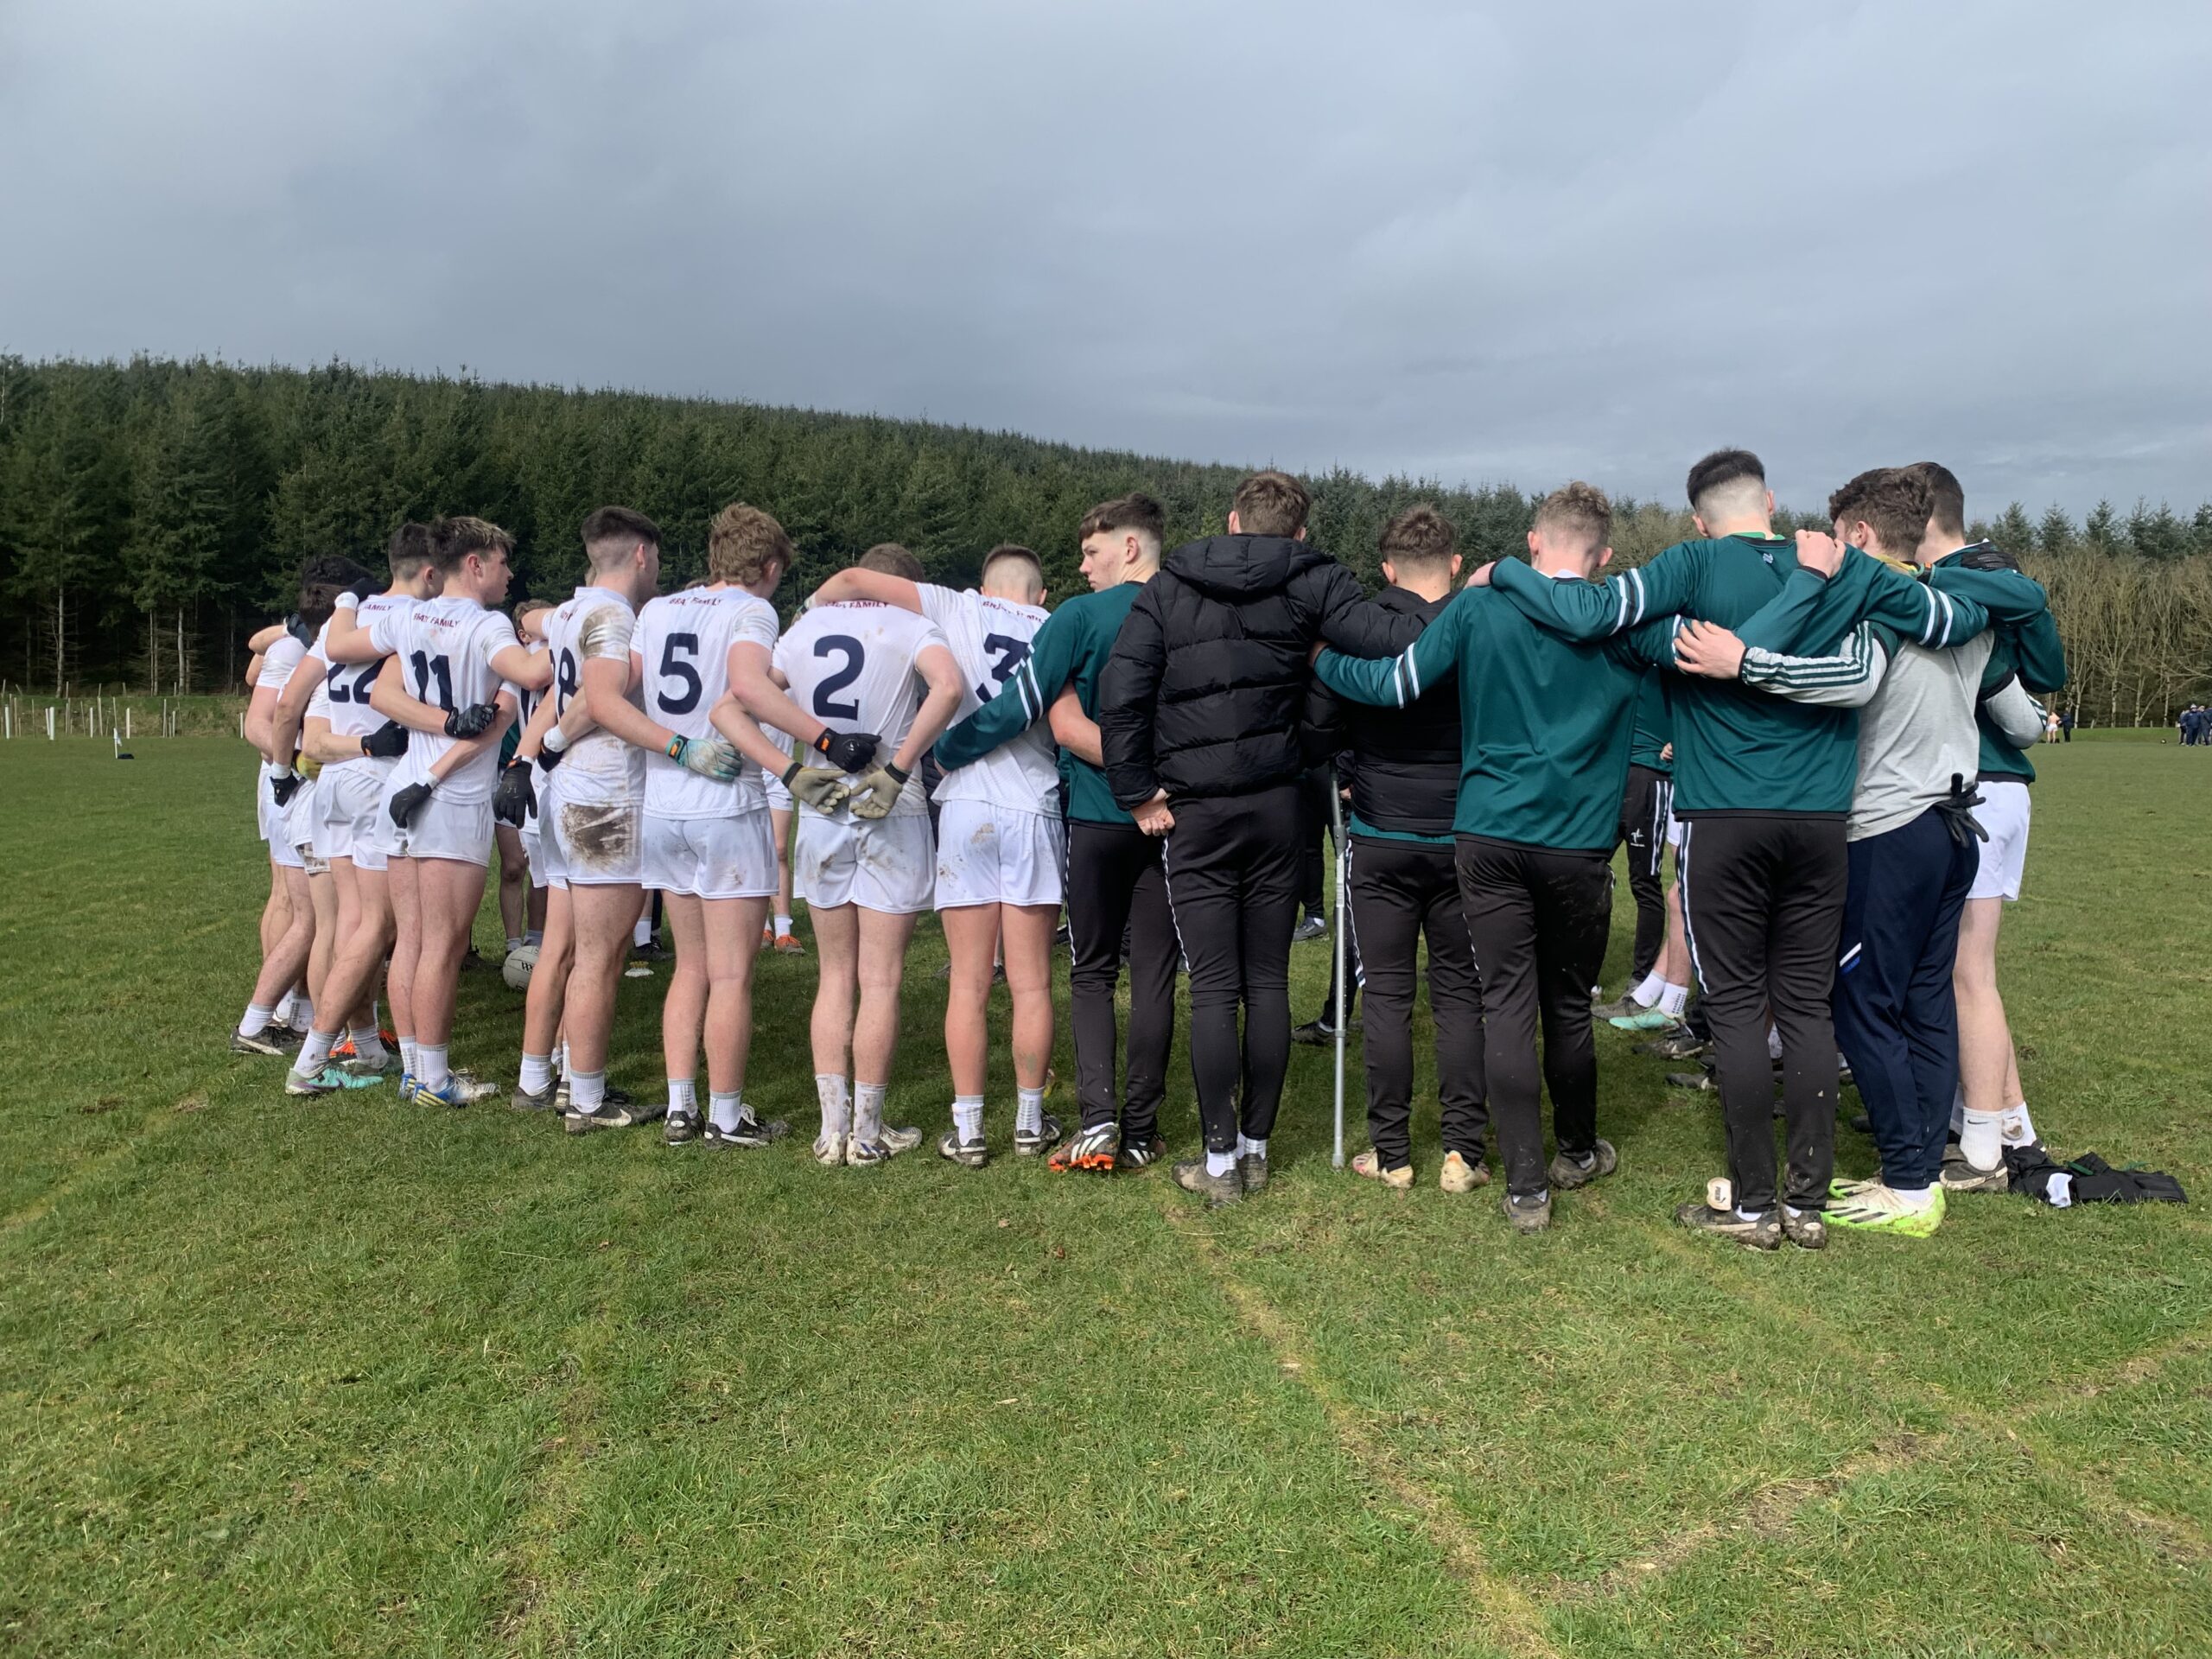 Photos from Paddy’s Weekend – Ladies Wicklow Minor Training and Wicklow v Kildare Minor Challenge